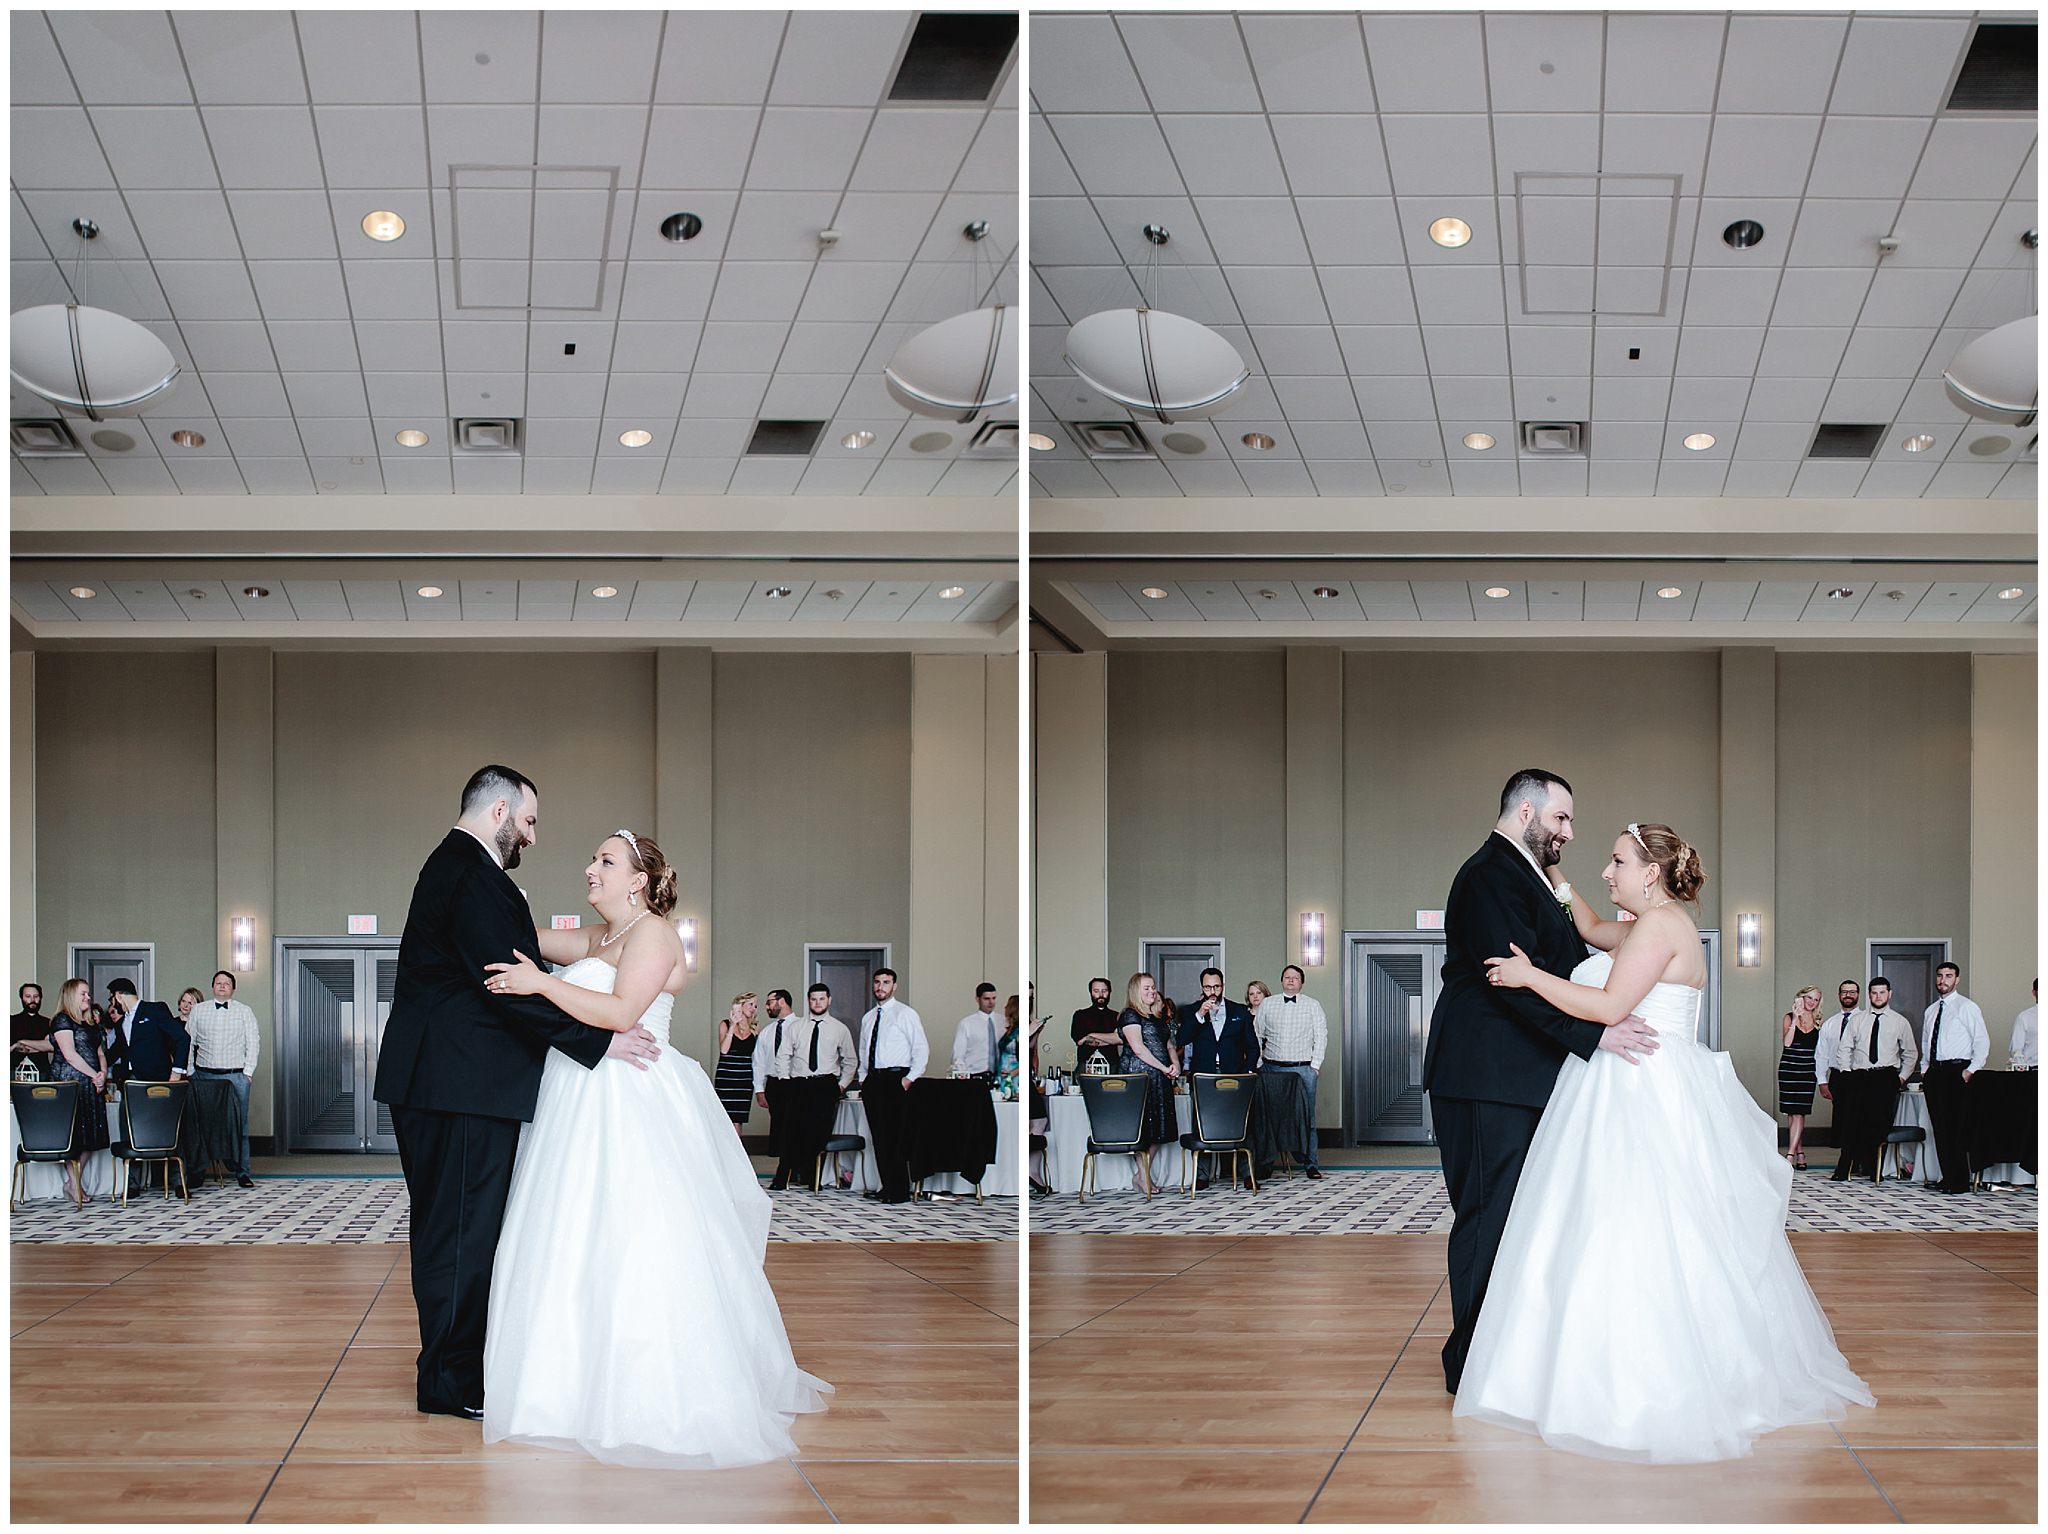 First dance at Duquesne University